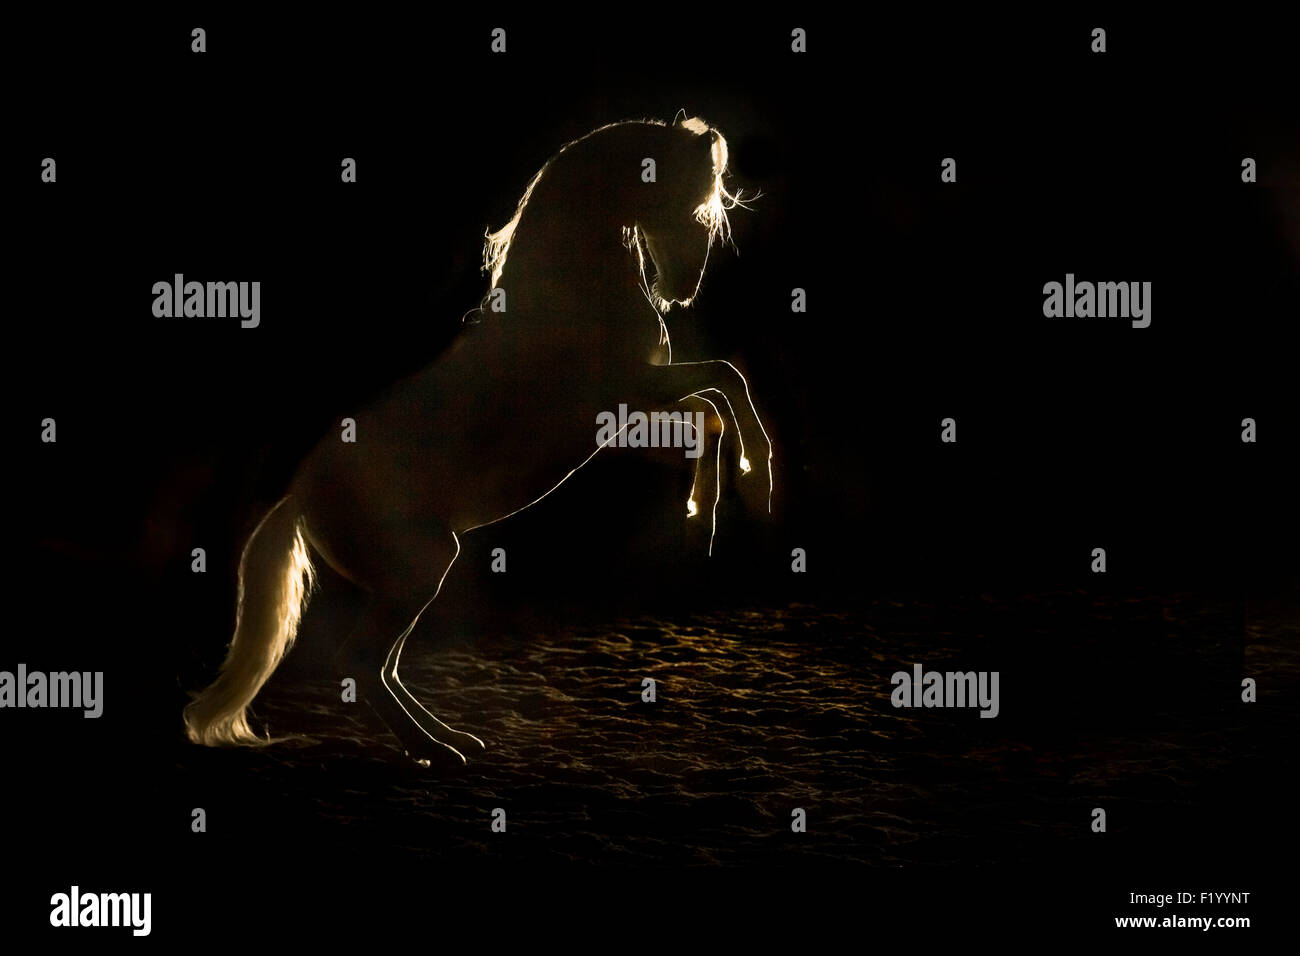 Alter Real Stallion rearing backlight seen against black background Germany Stock Photo